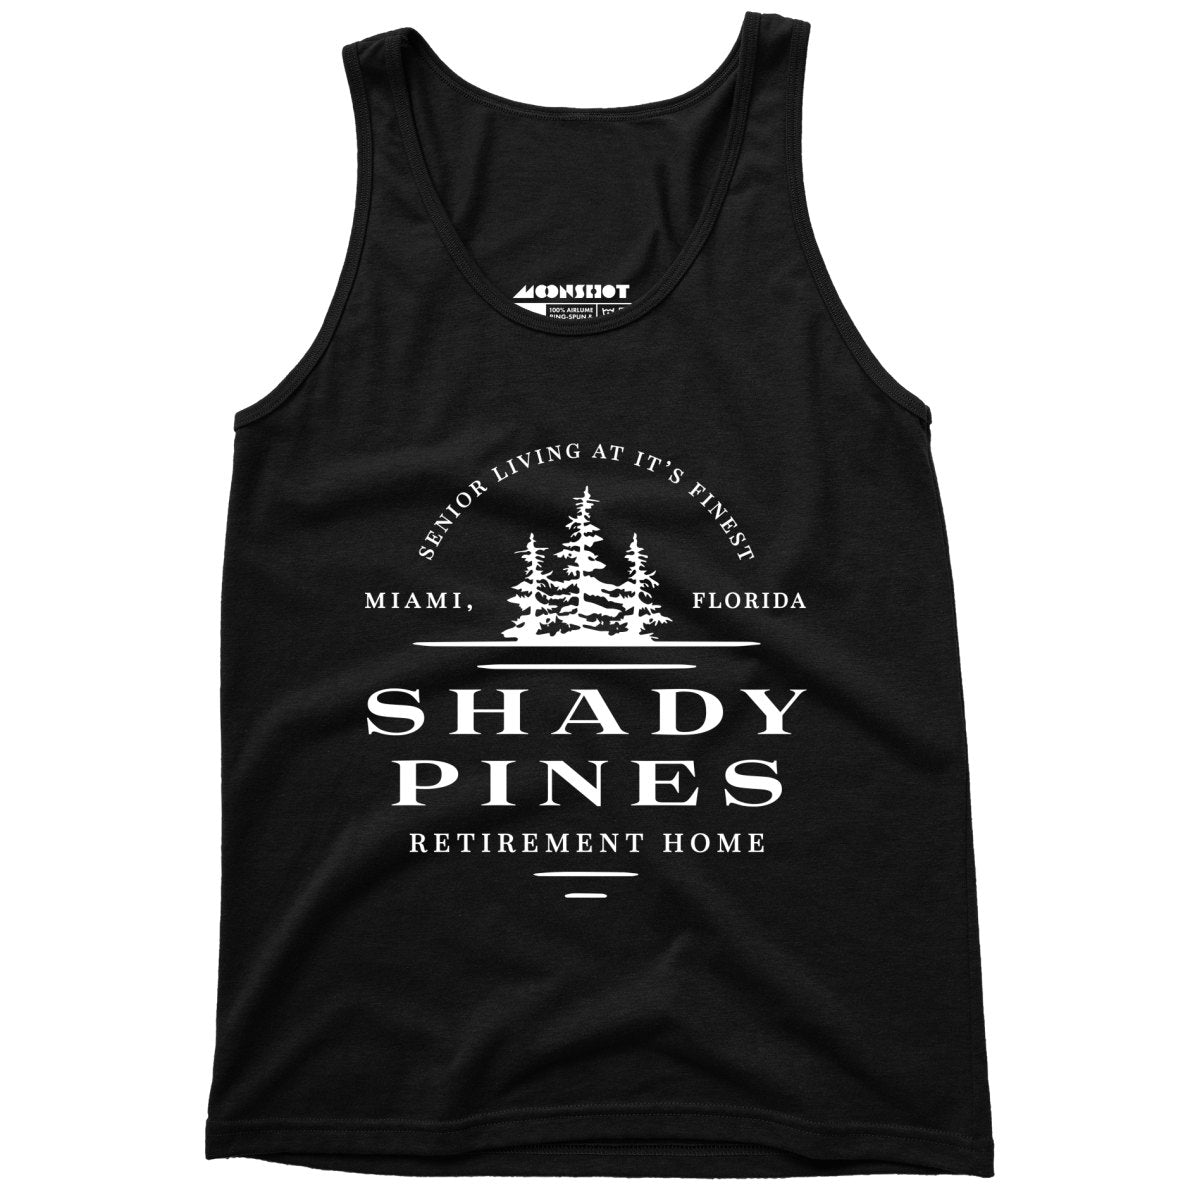 Shady Pines Retirement Home - Unisex Tank Top